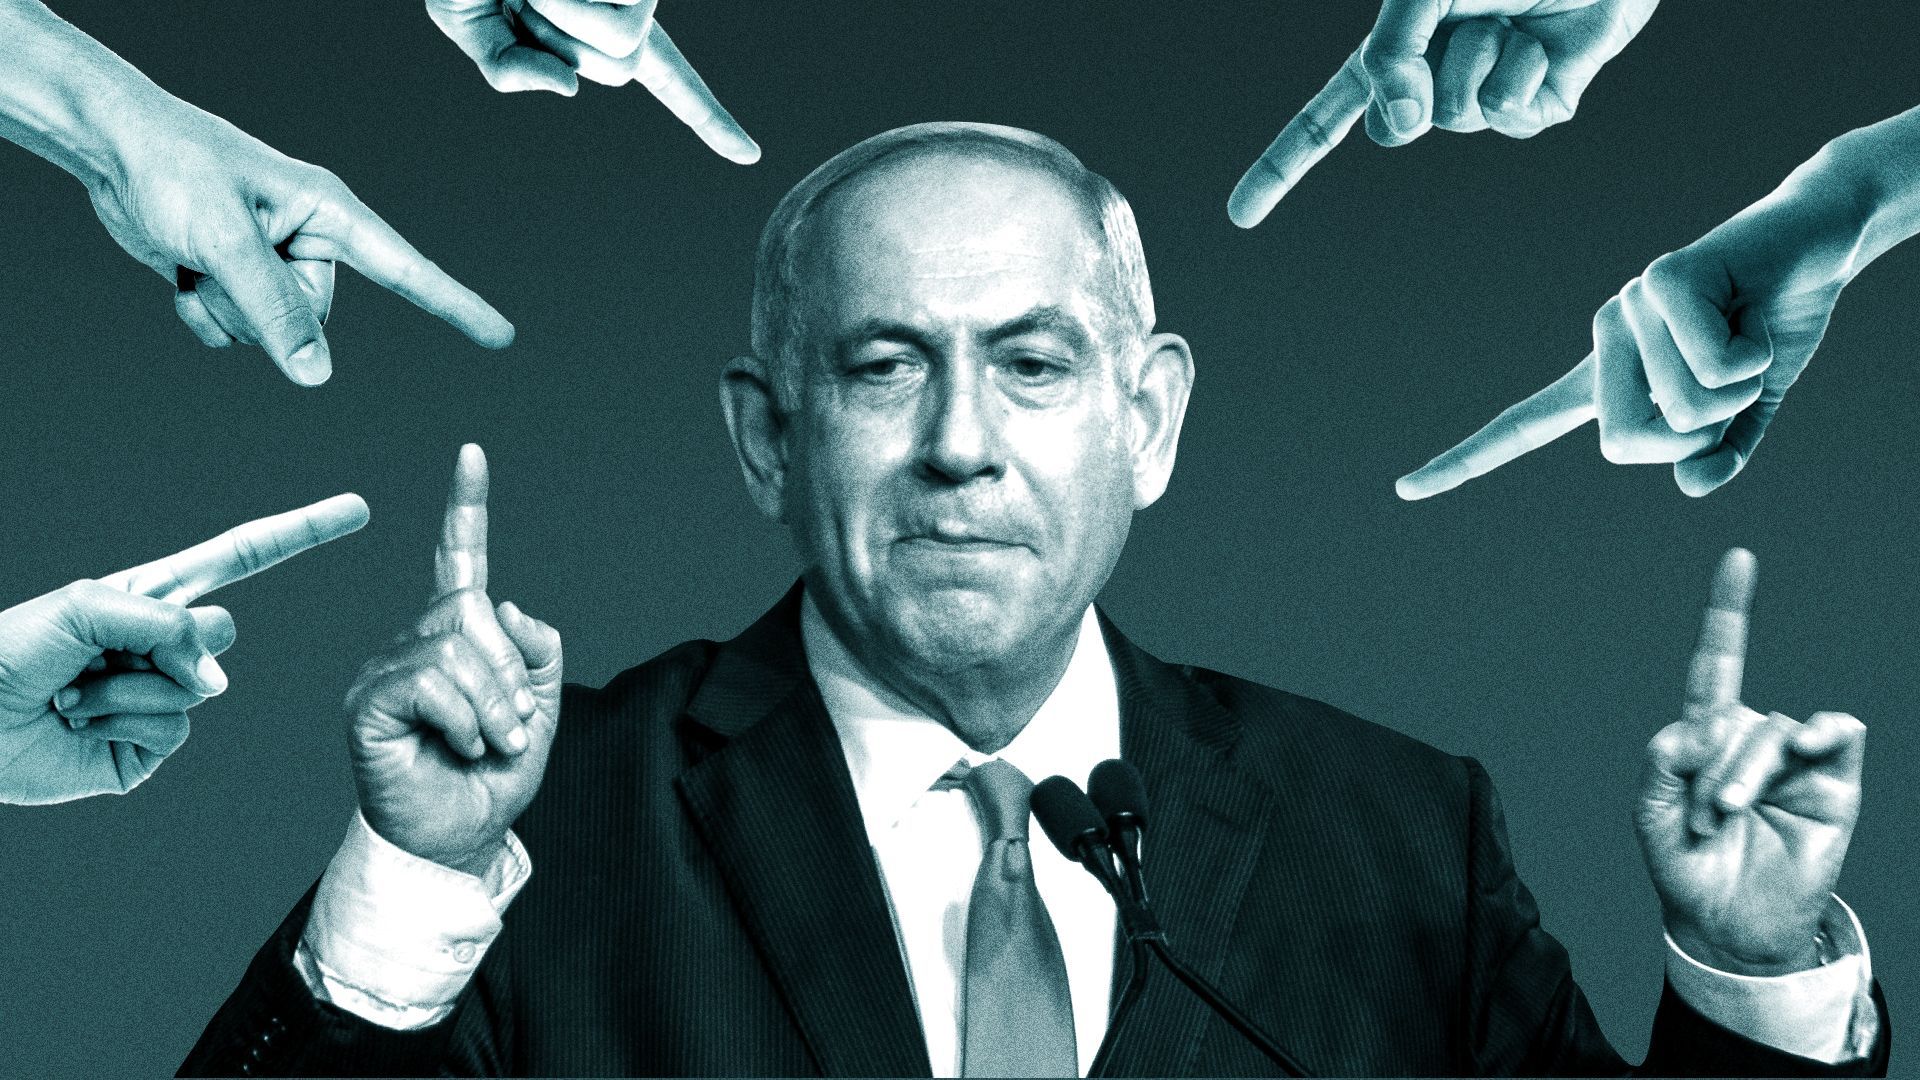 Photo illustration of Benjamin Netanyahu pointing both of his index fingers at other hands pointing at him.